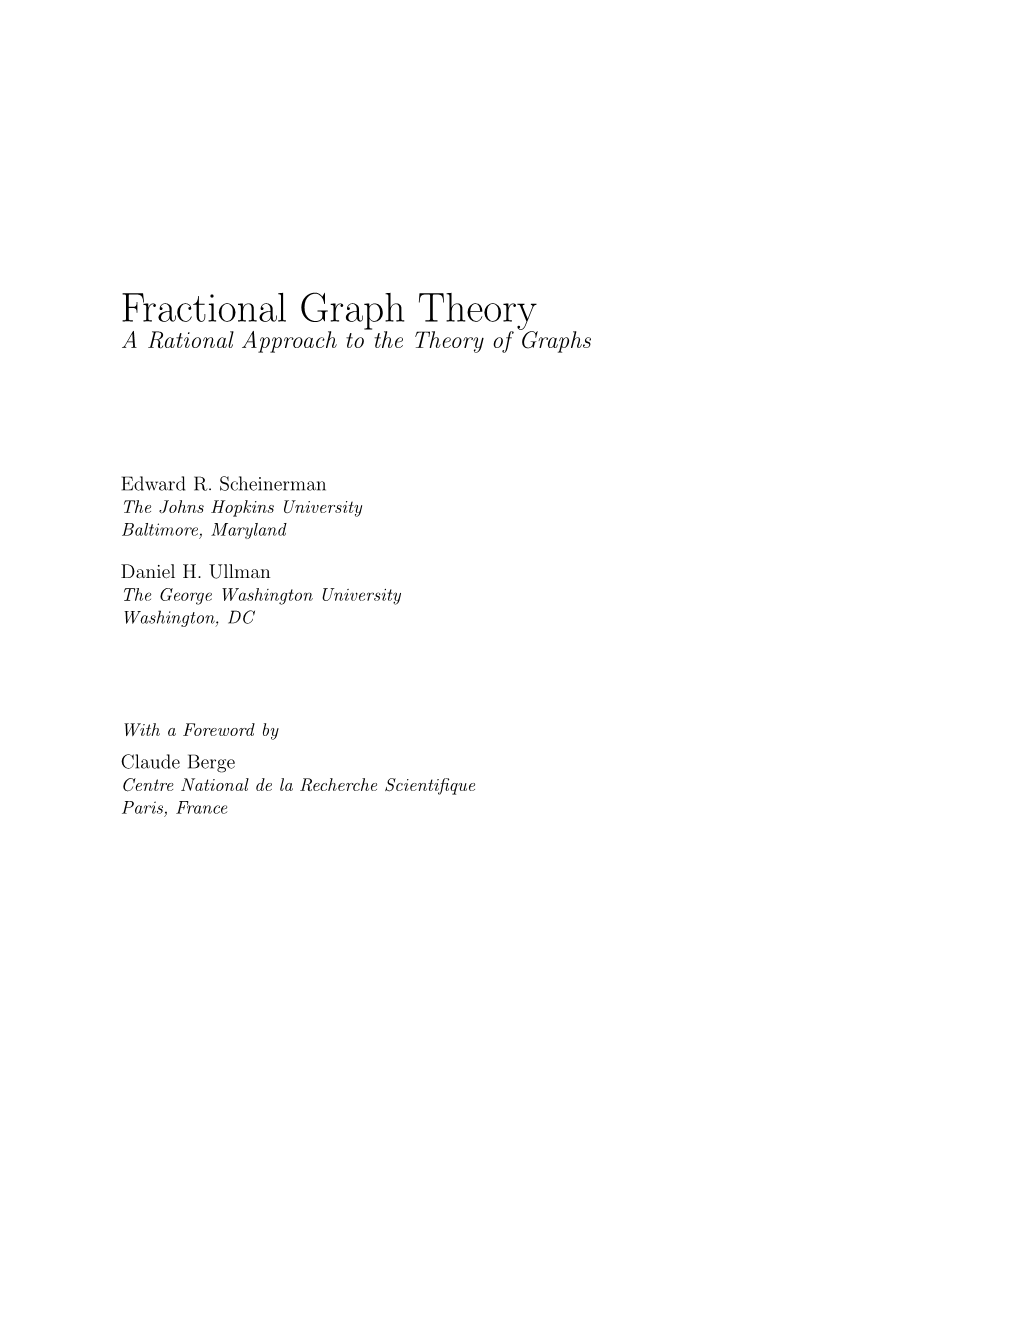 Fractional Graph Theory a Rational Approach to the Theory of Graphs